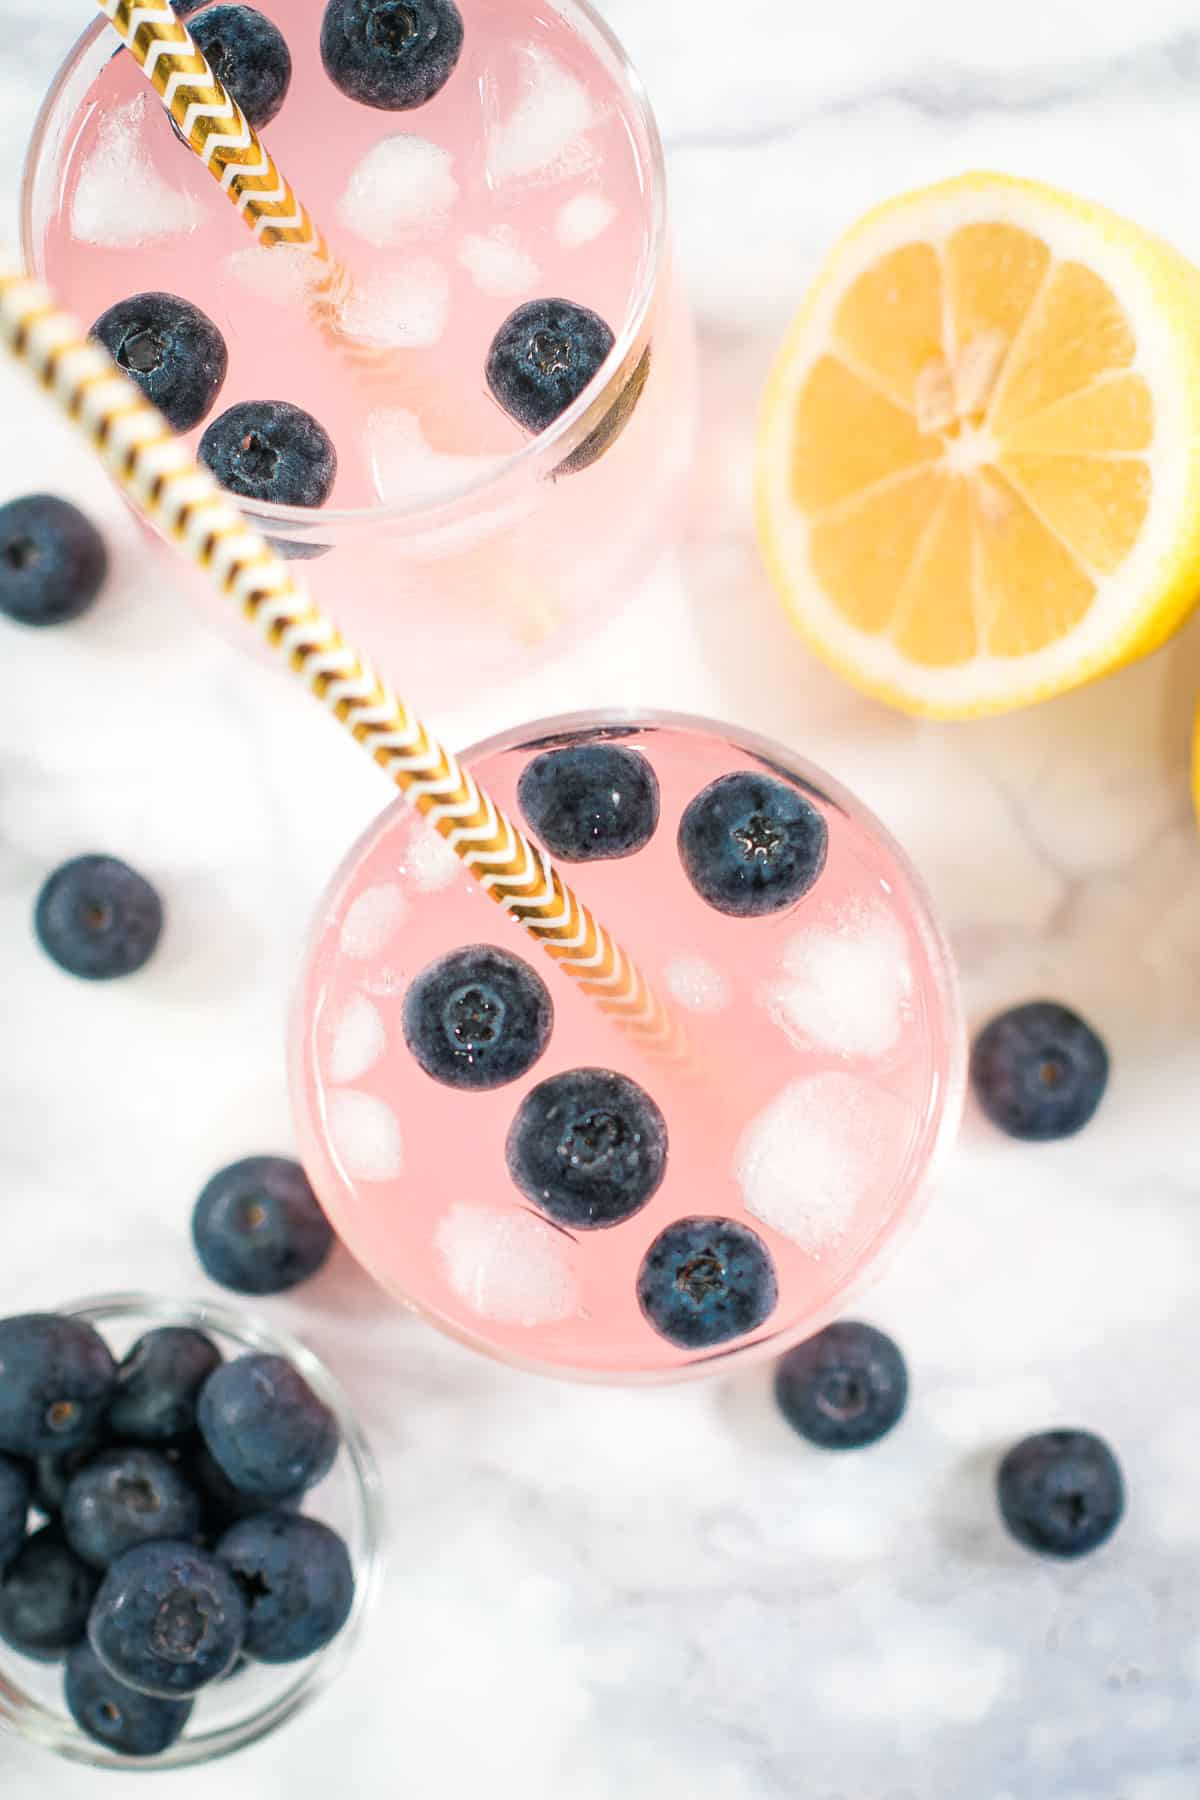 Top view of pink lemonade with blueberries in a glass